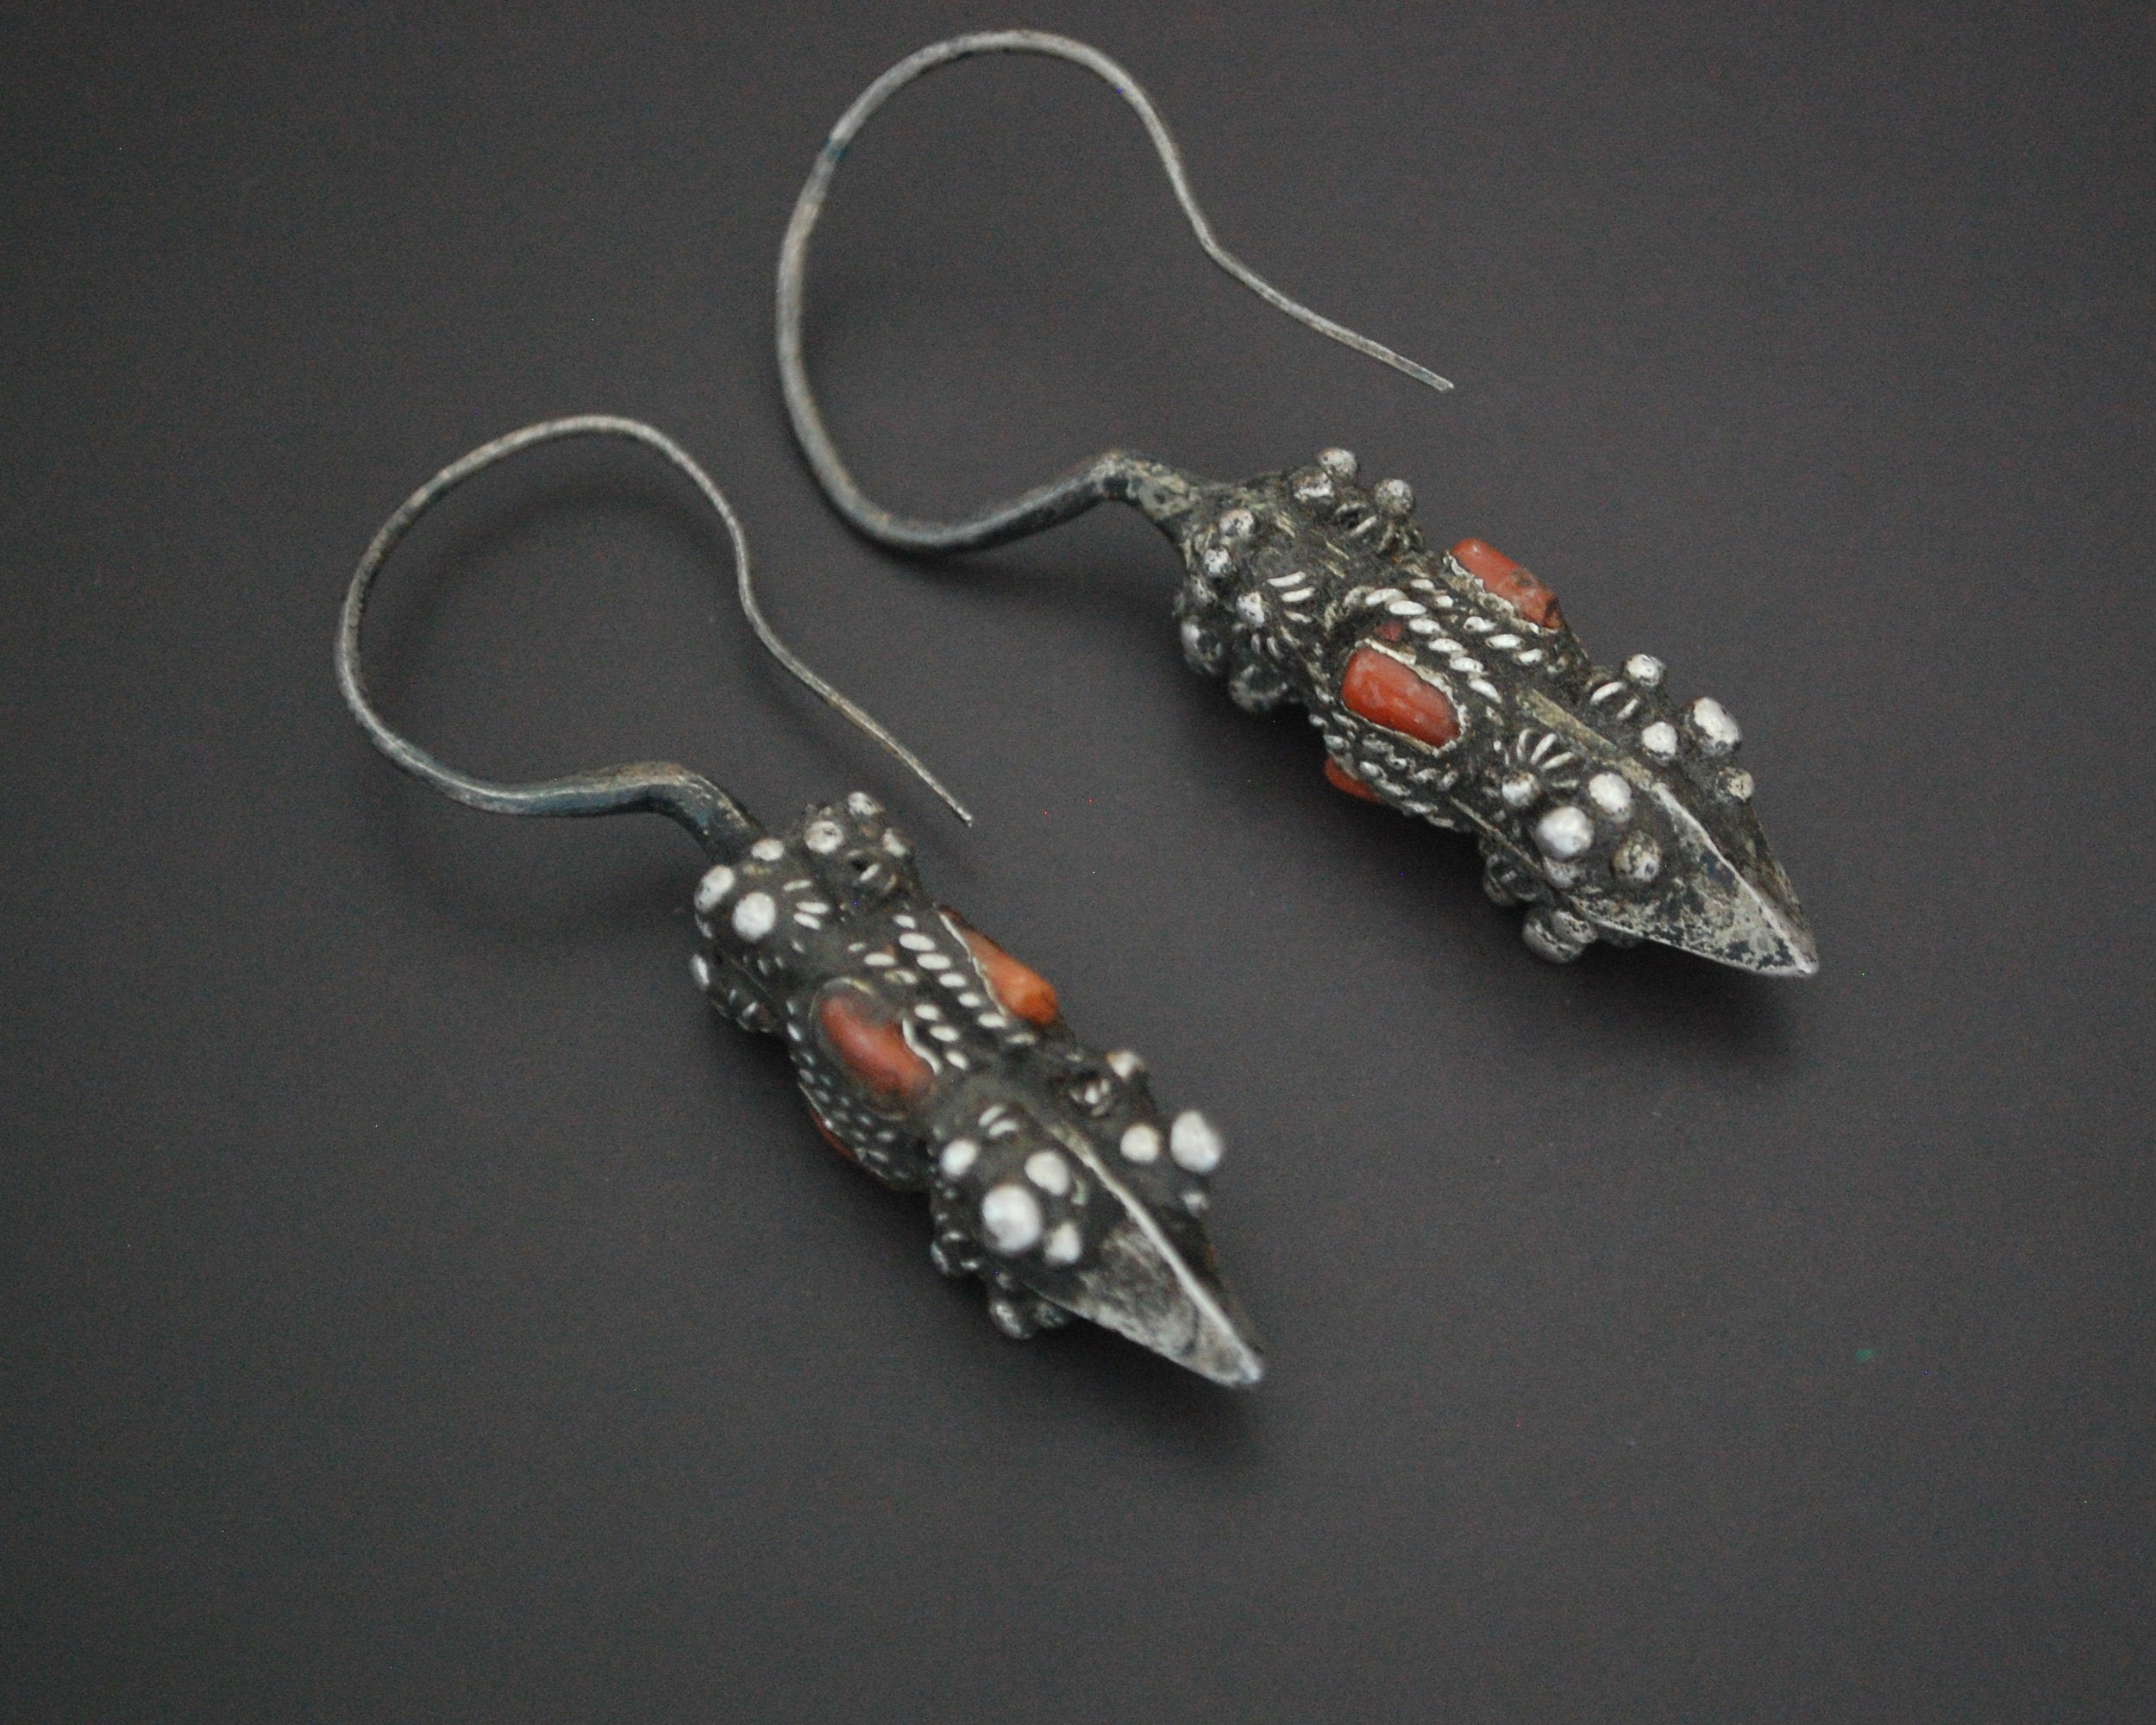 Antique Kirghiz Coral Earrings